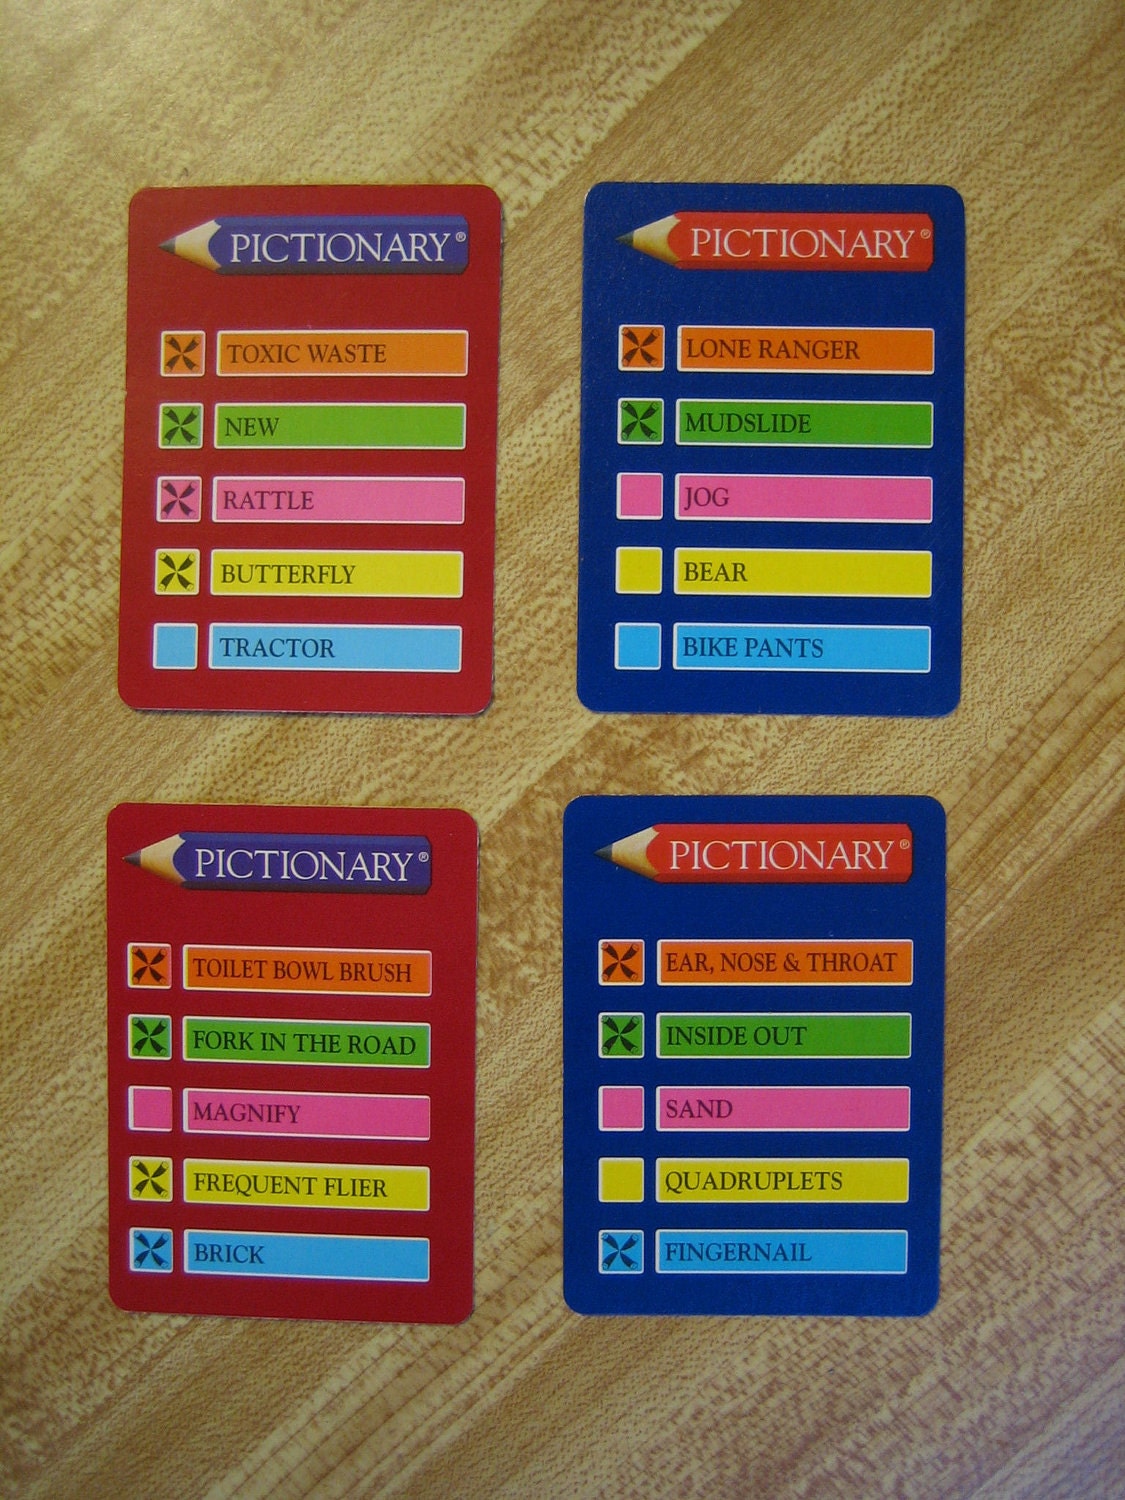 pictionary-cards-set-of-320-cards-double-sided-red-and-blue